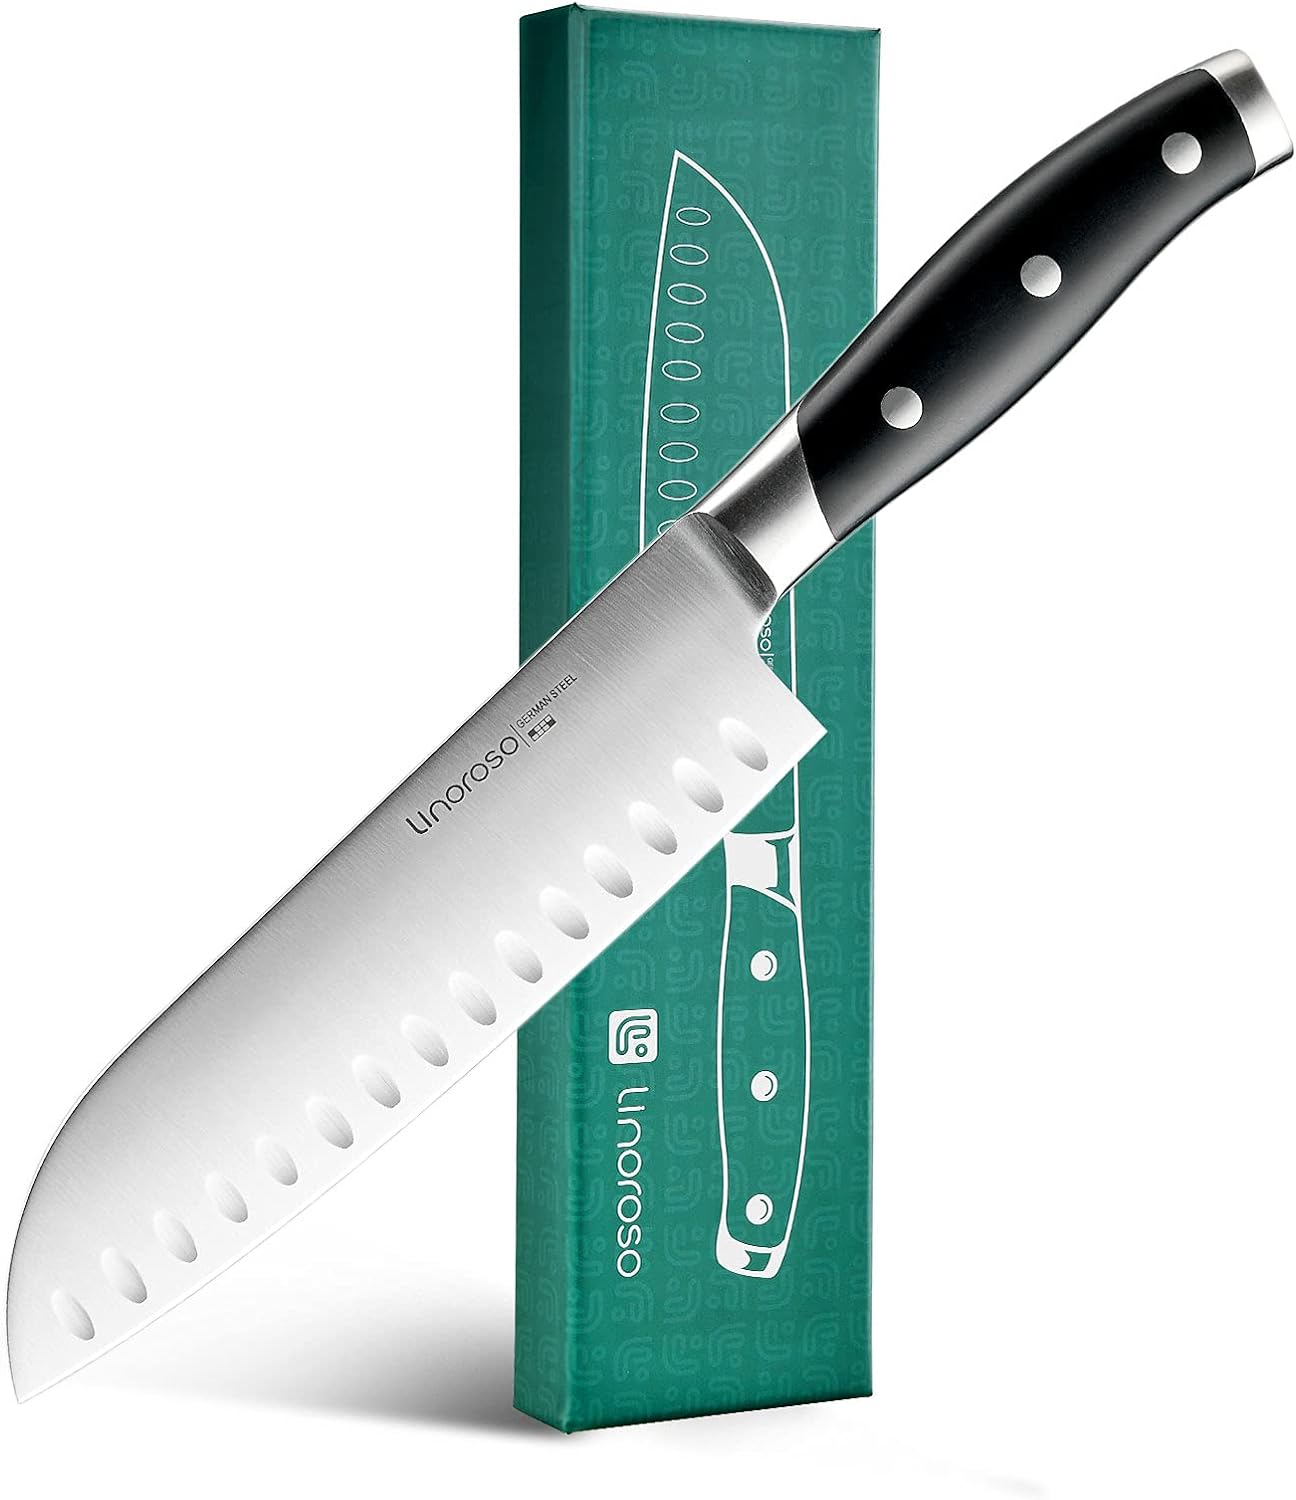 KD Kitchen Knife Sharp German Stainless Steel with Gift Box